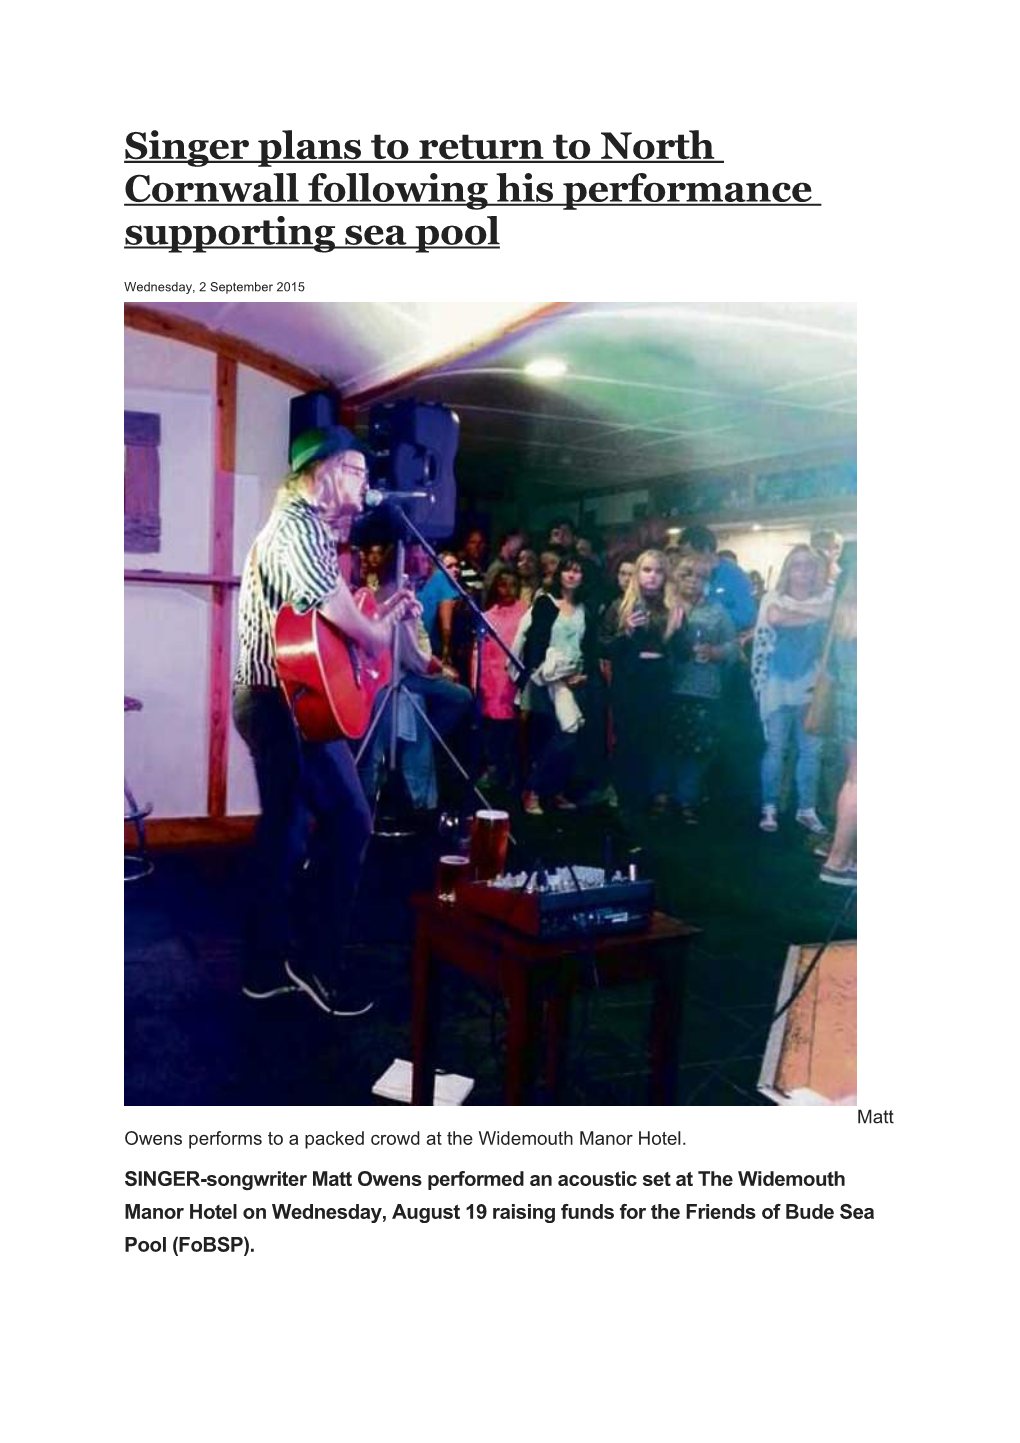 Singer Plans to Return to North Cornwall Following His Performance Supporting Sea Pool